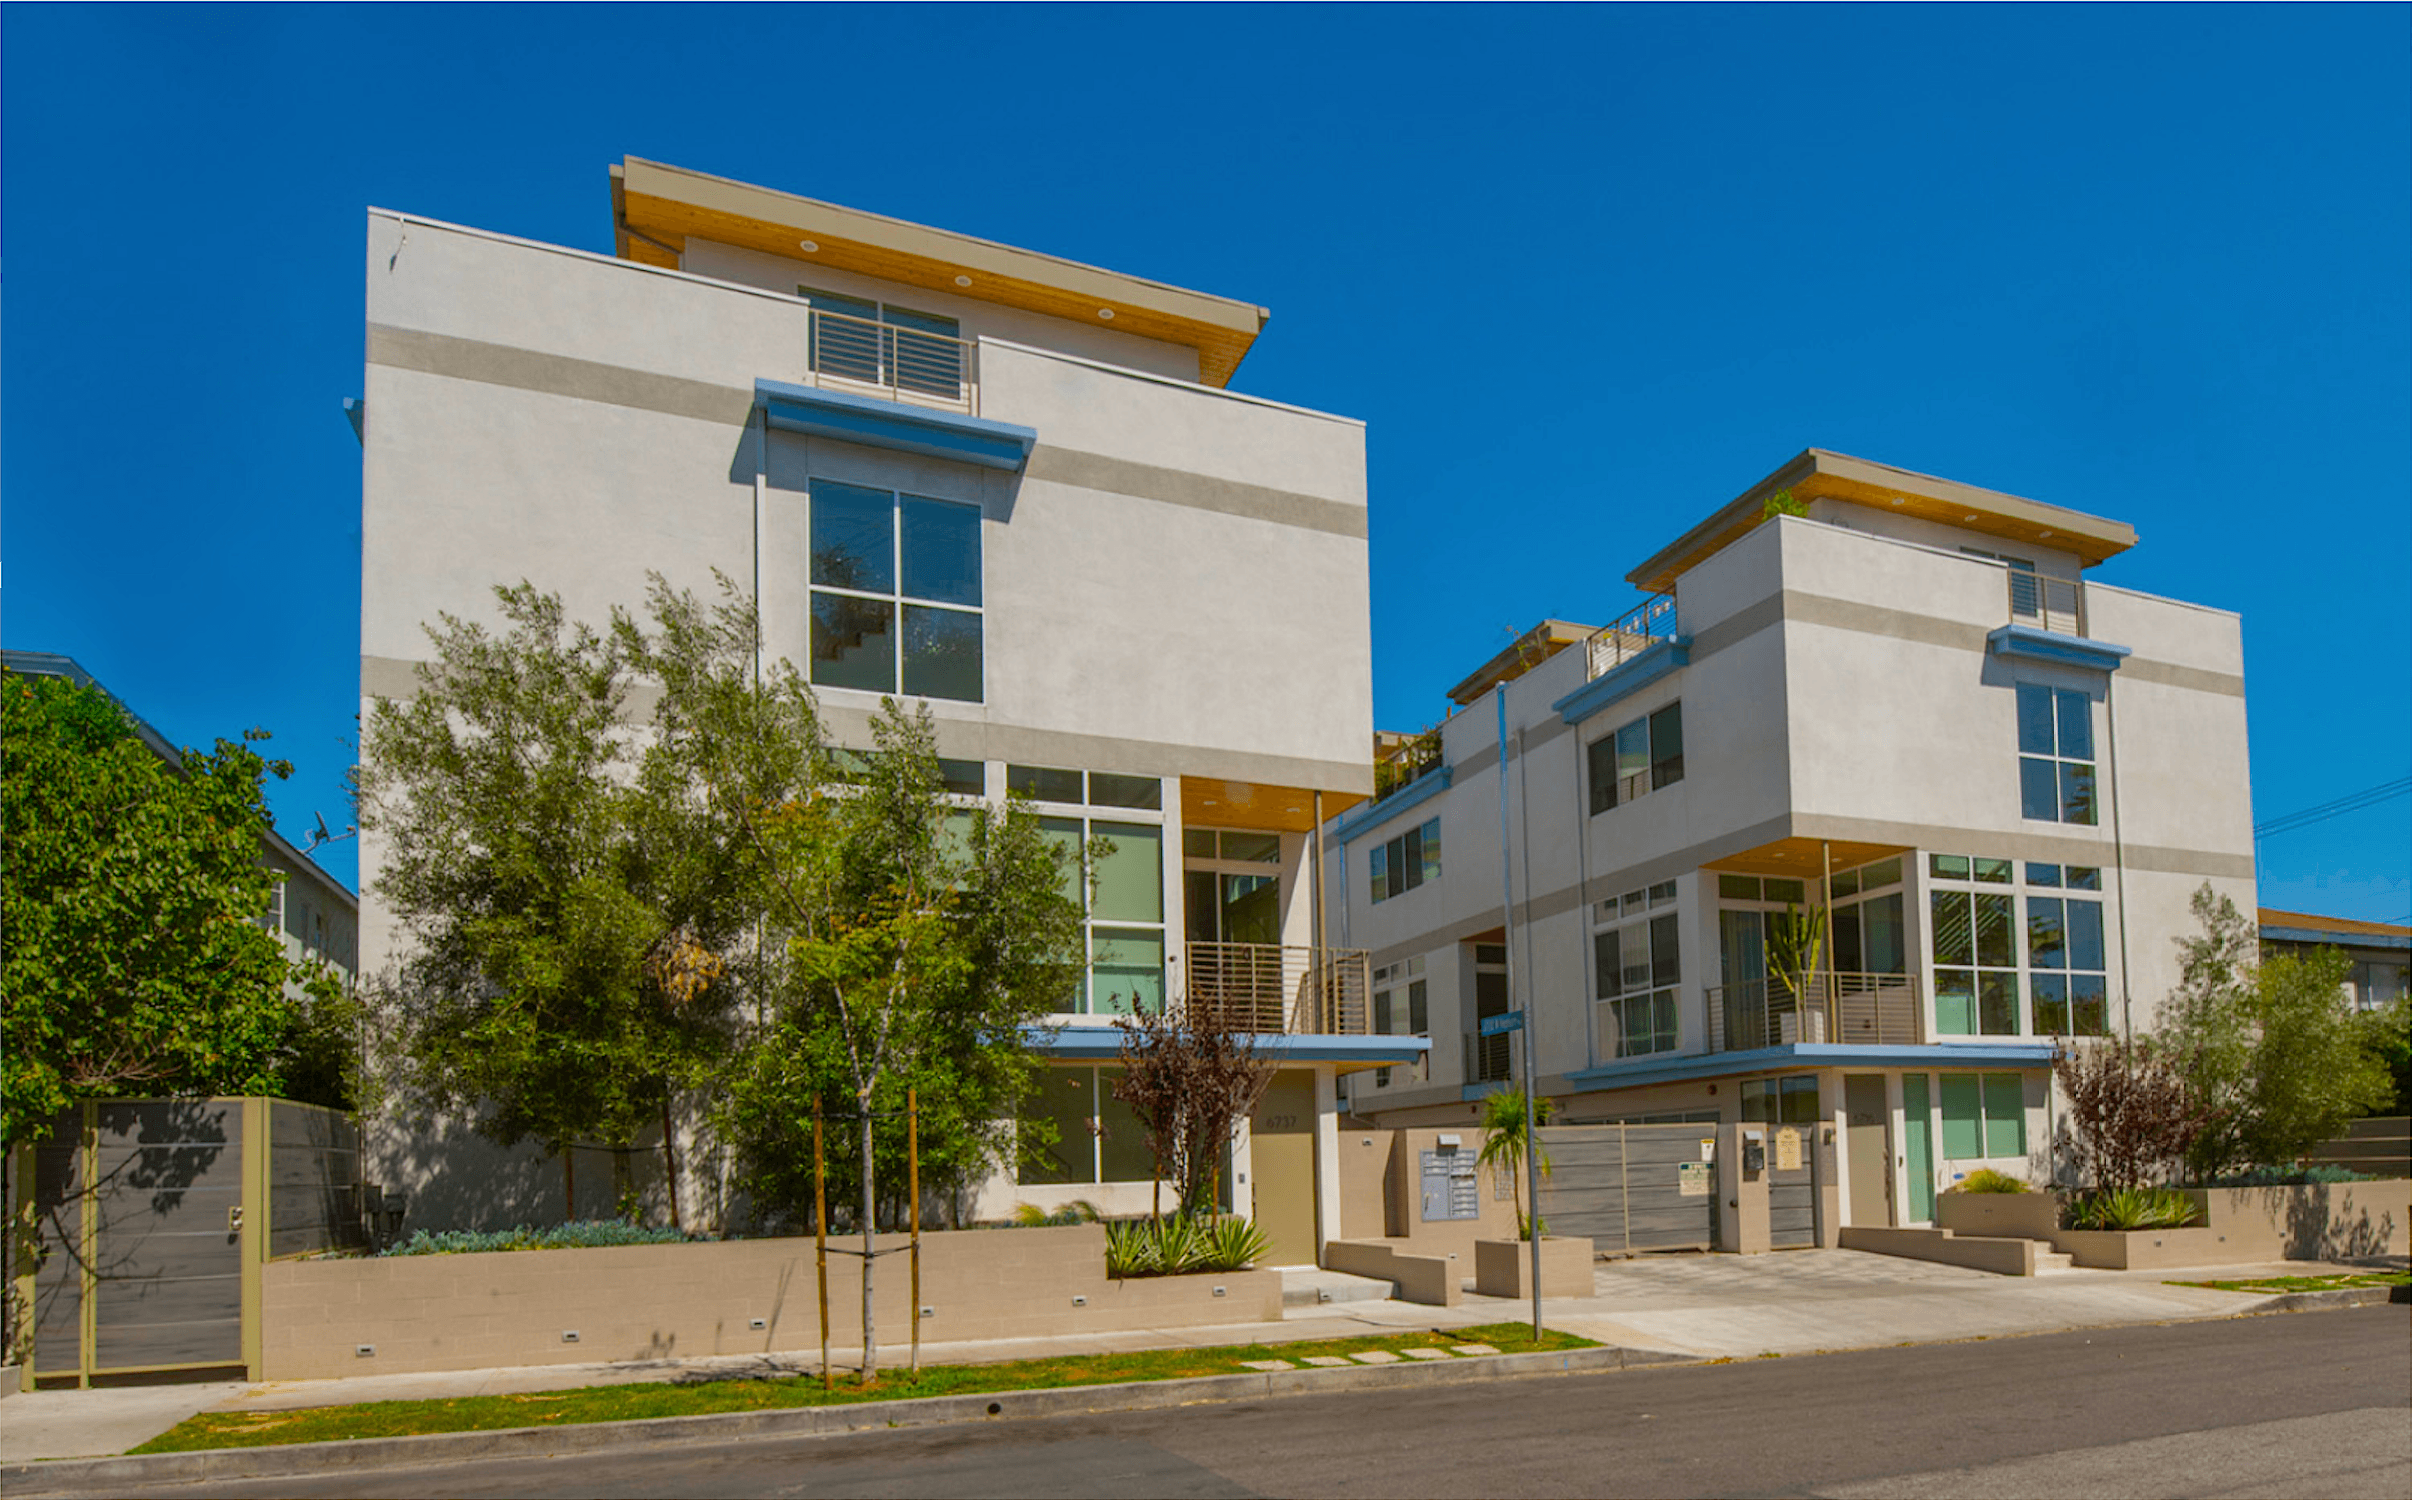 Introducing Hollywood Colony A Modern Architectural Town Home in a Coveted Weho/Hollywood border with dreamy views of the Hollywood Hills.